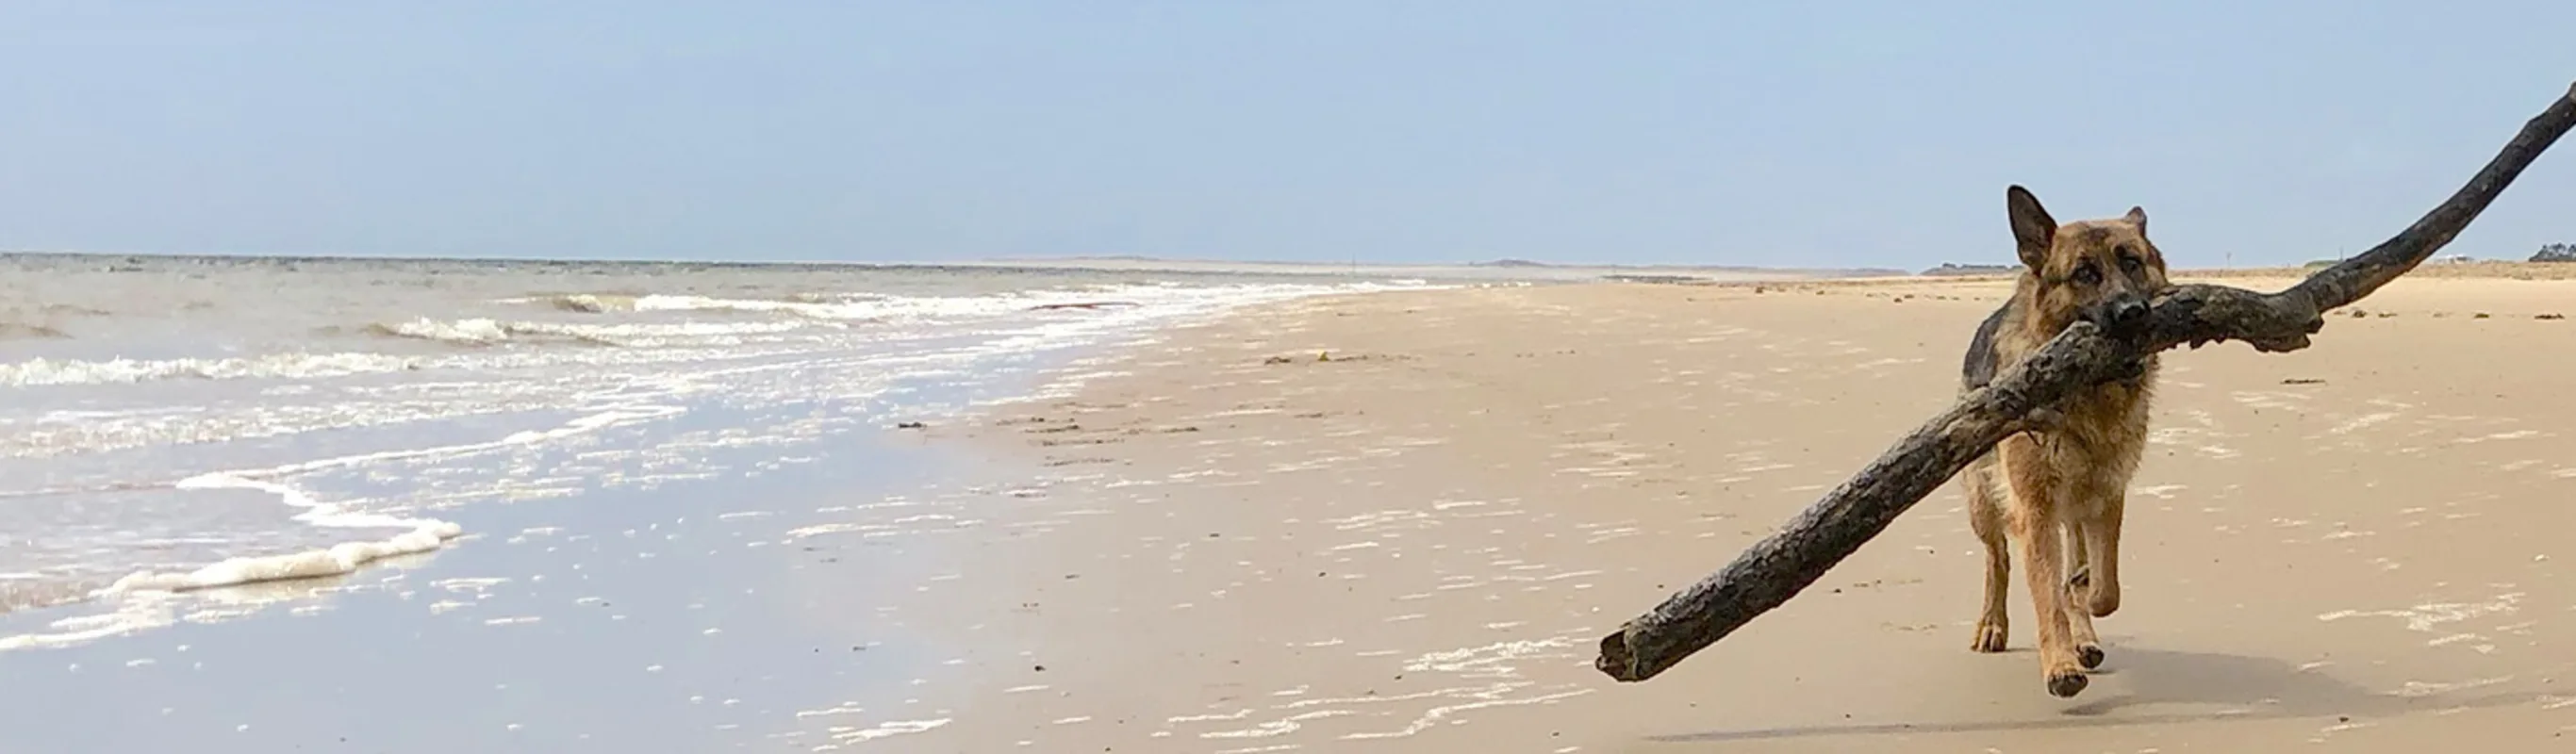 A dog walking on a beach and carrying a large branch in their motuh